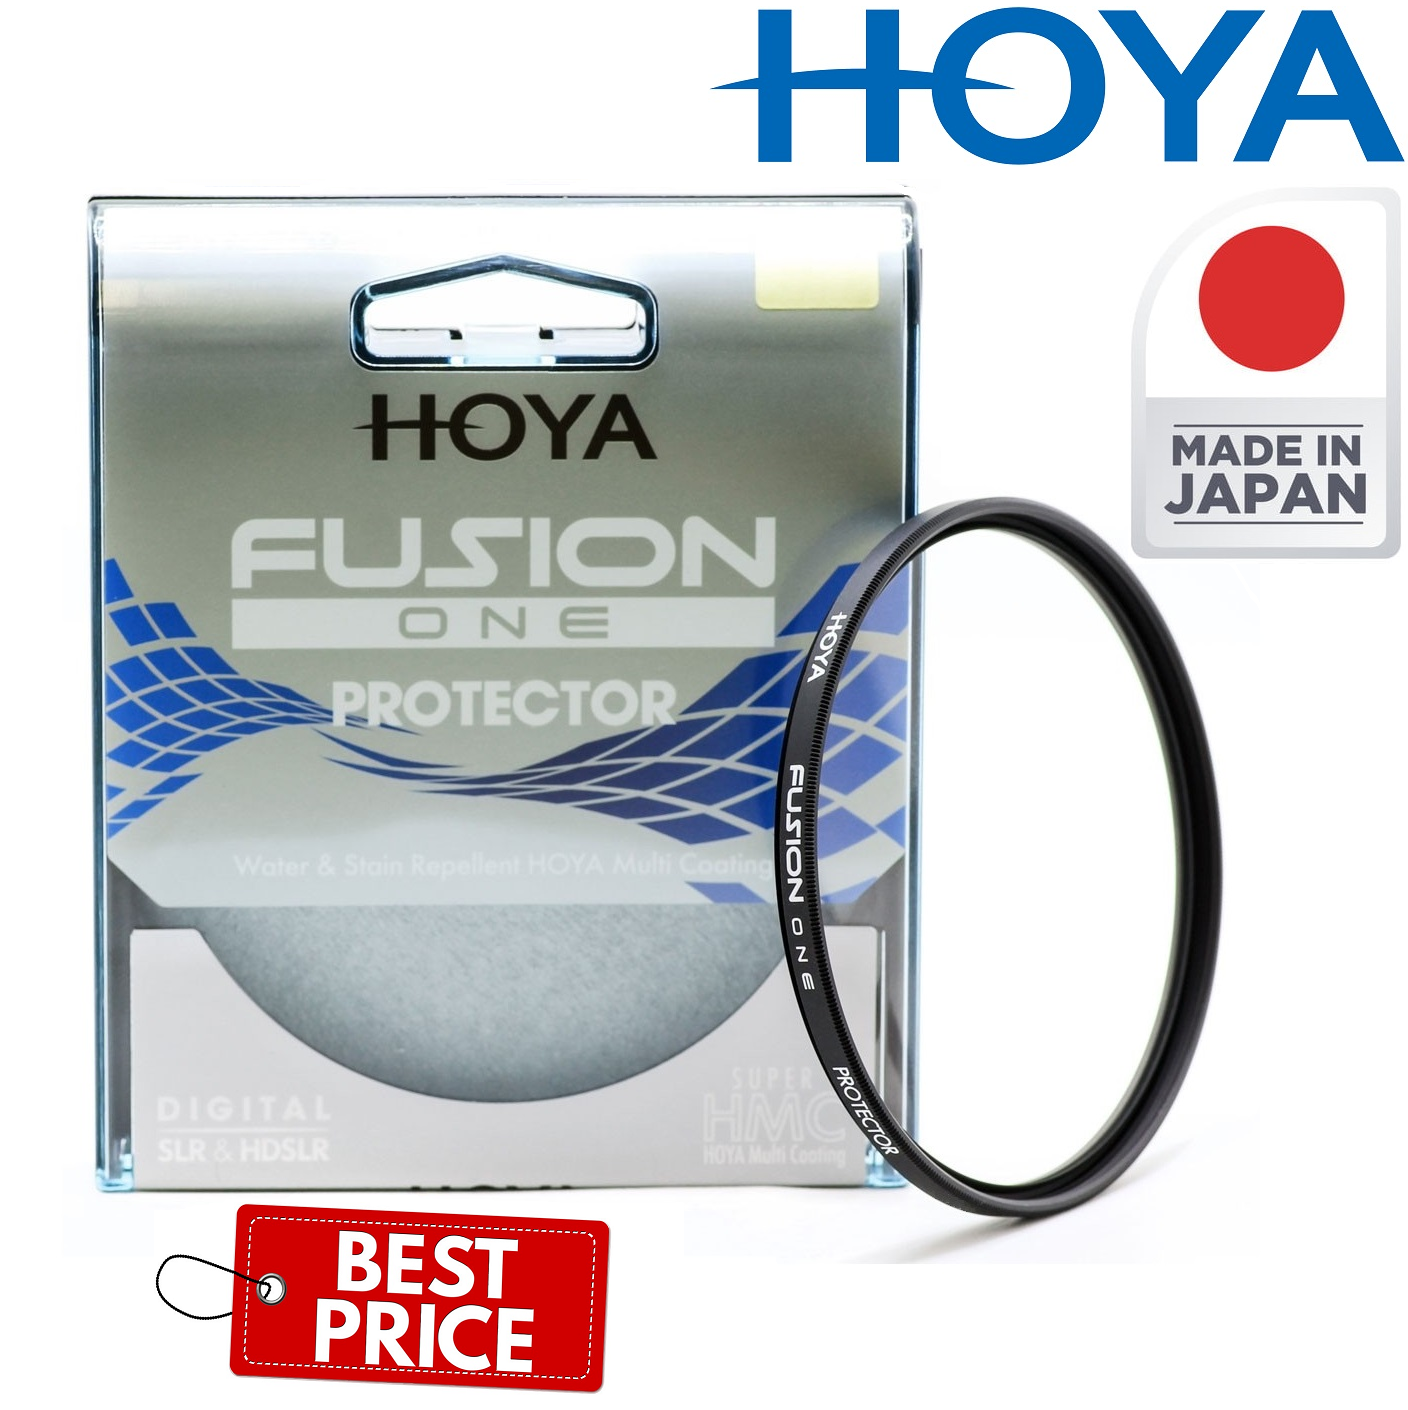 Hoya 40.5mm Fusion One Protector Filter